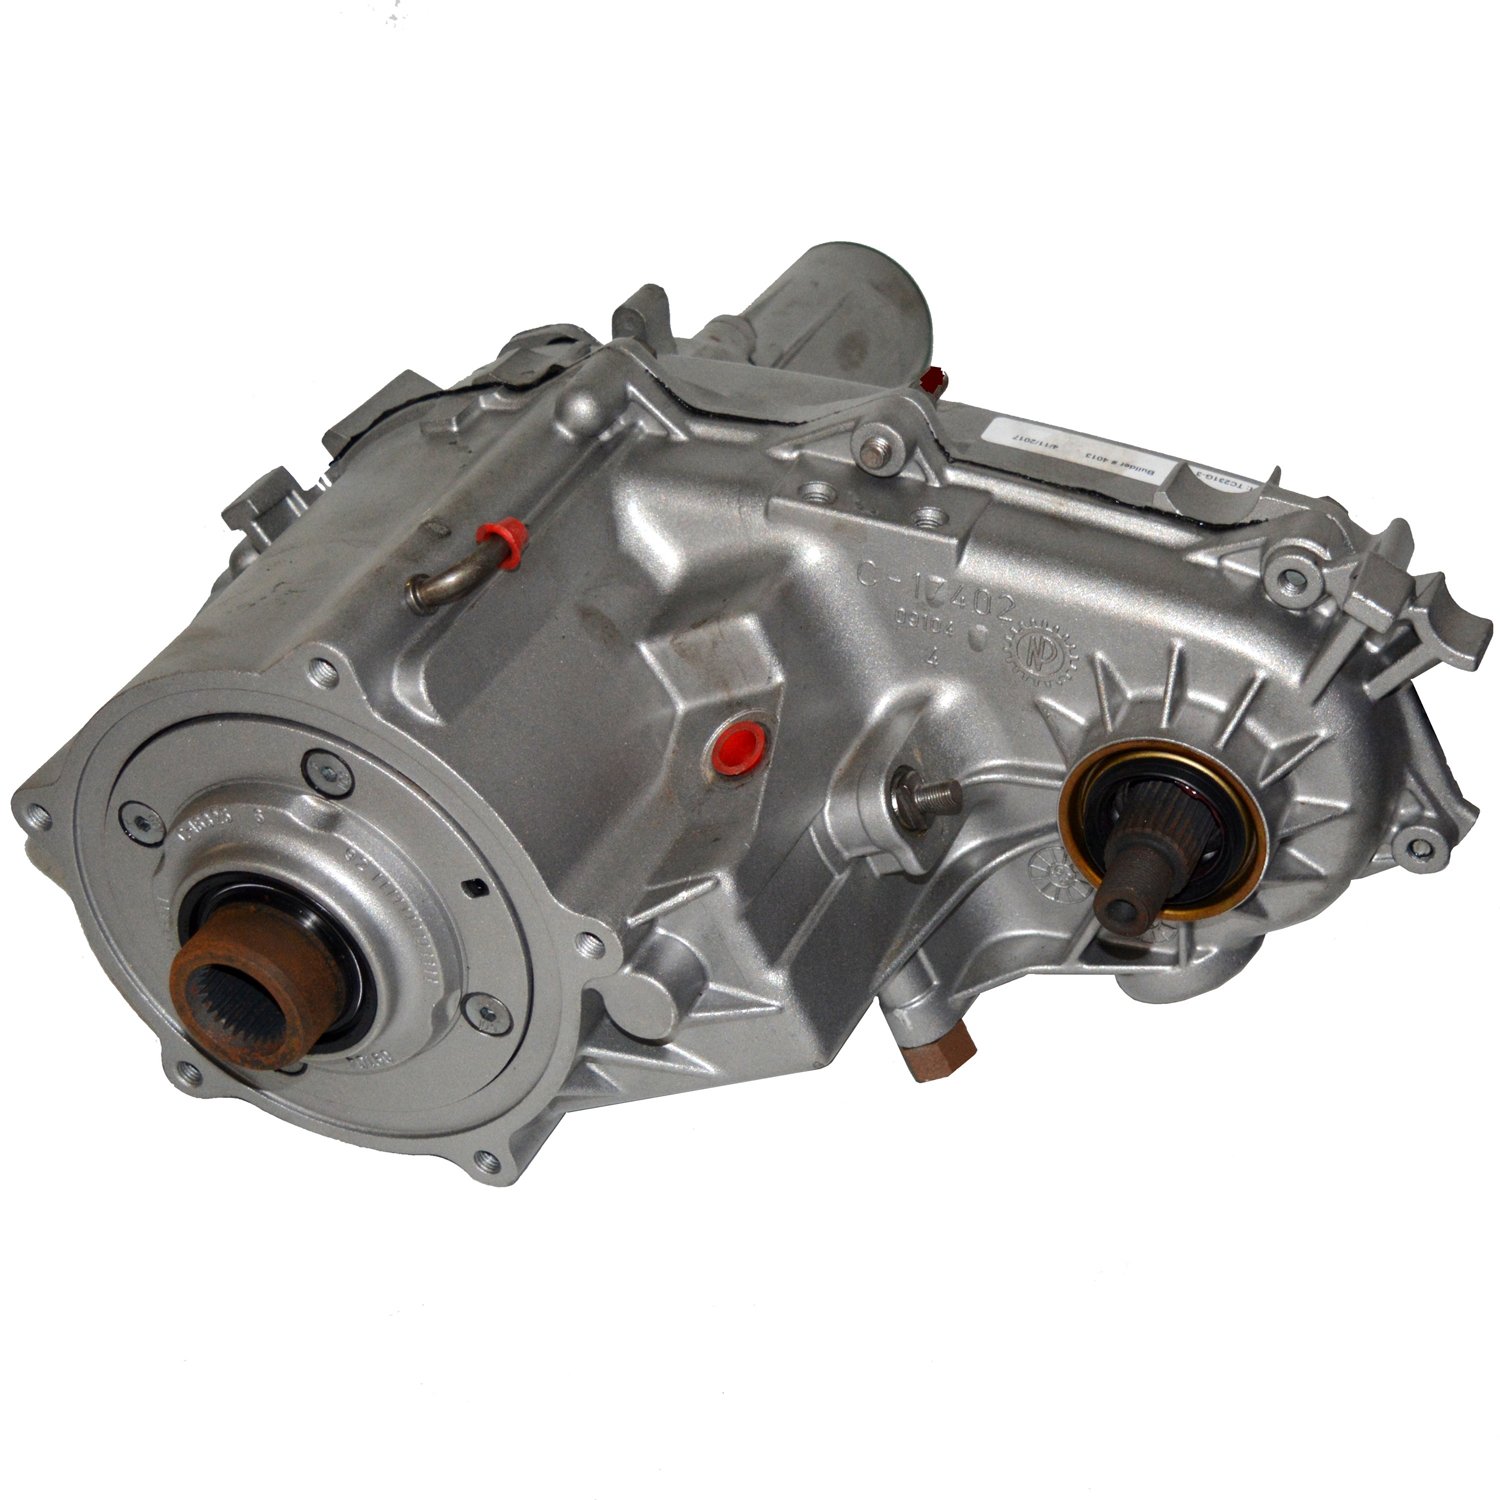 Remanufactured NP231 Transfer Case for GM 92-94 S10 & S15